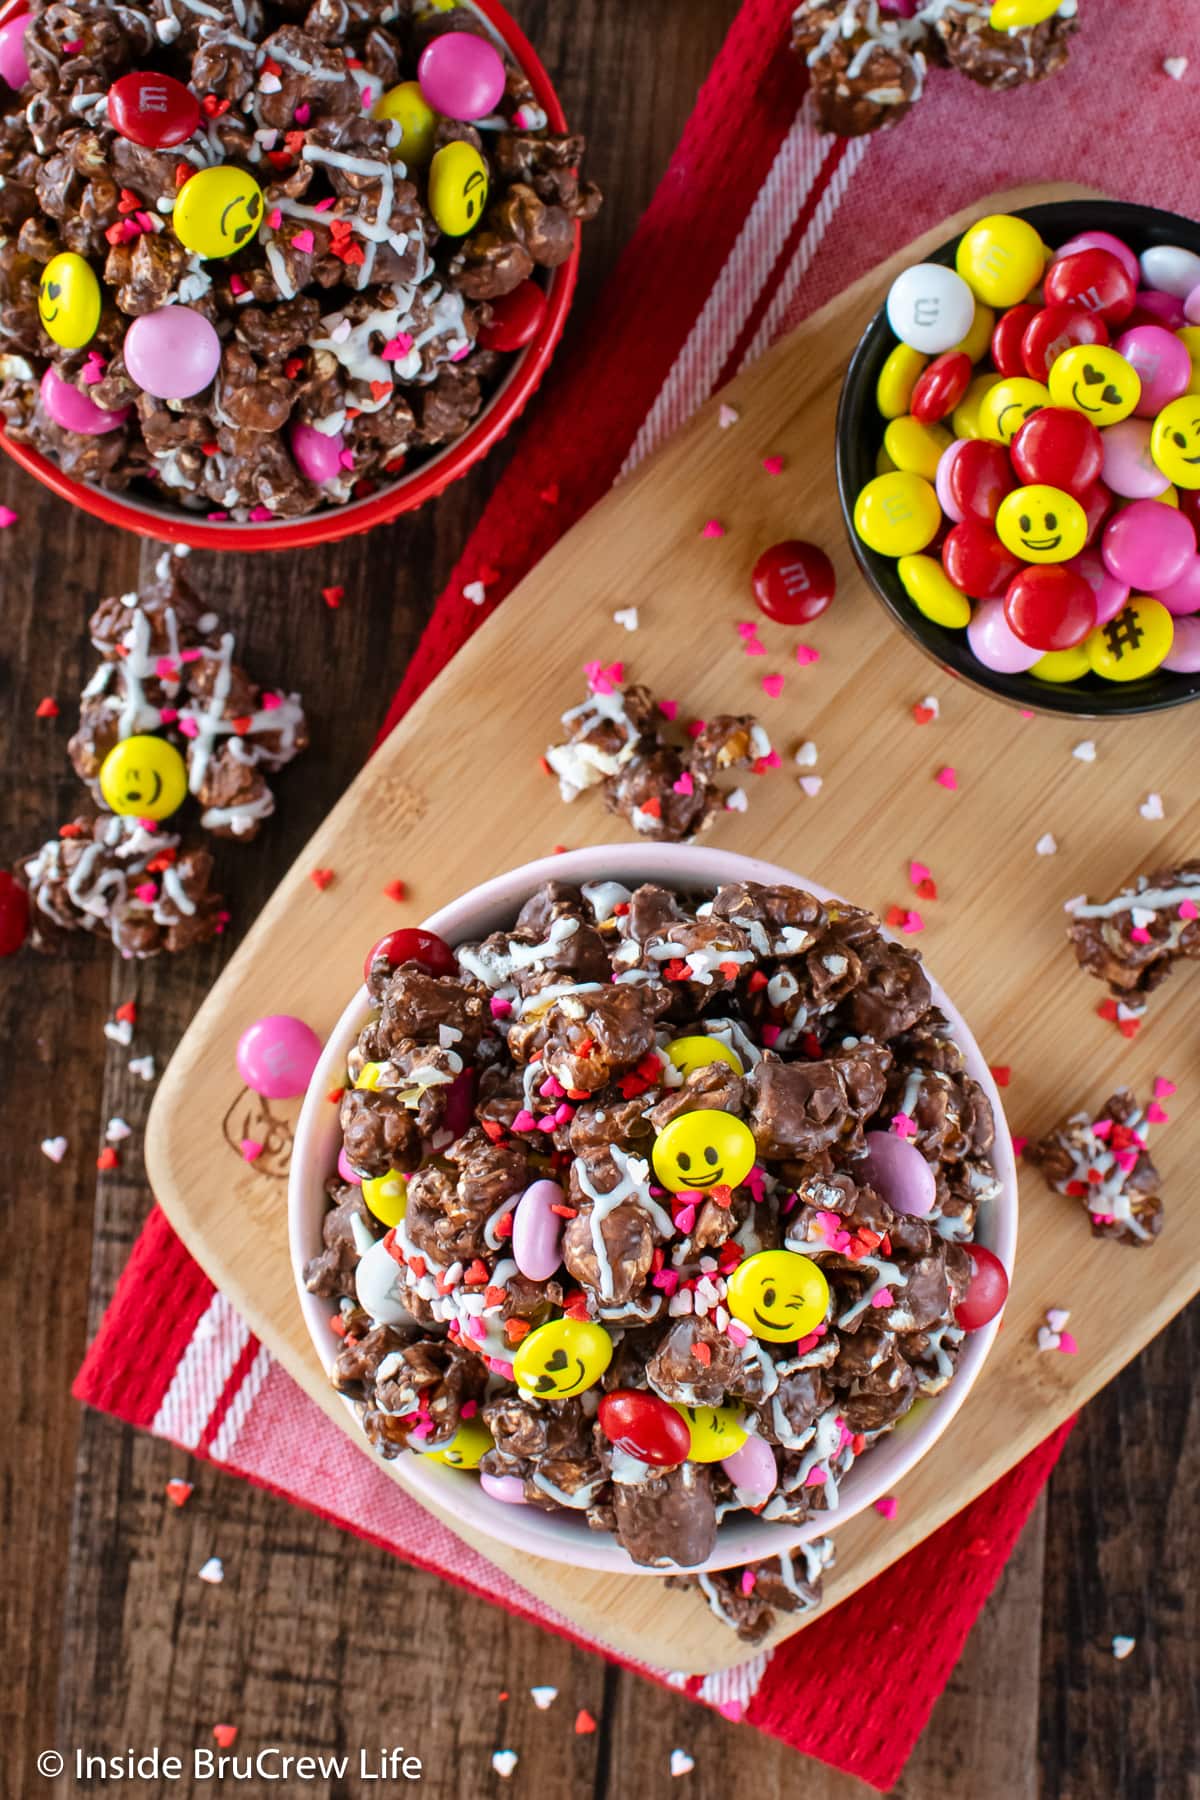 Bowls of popcorn with candies on a tray.